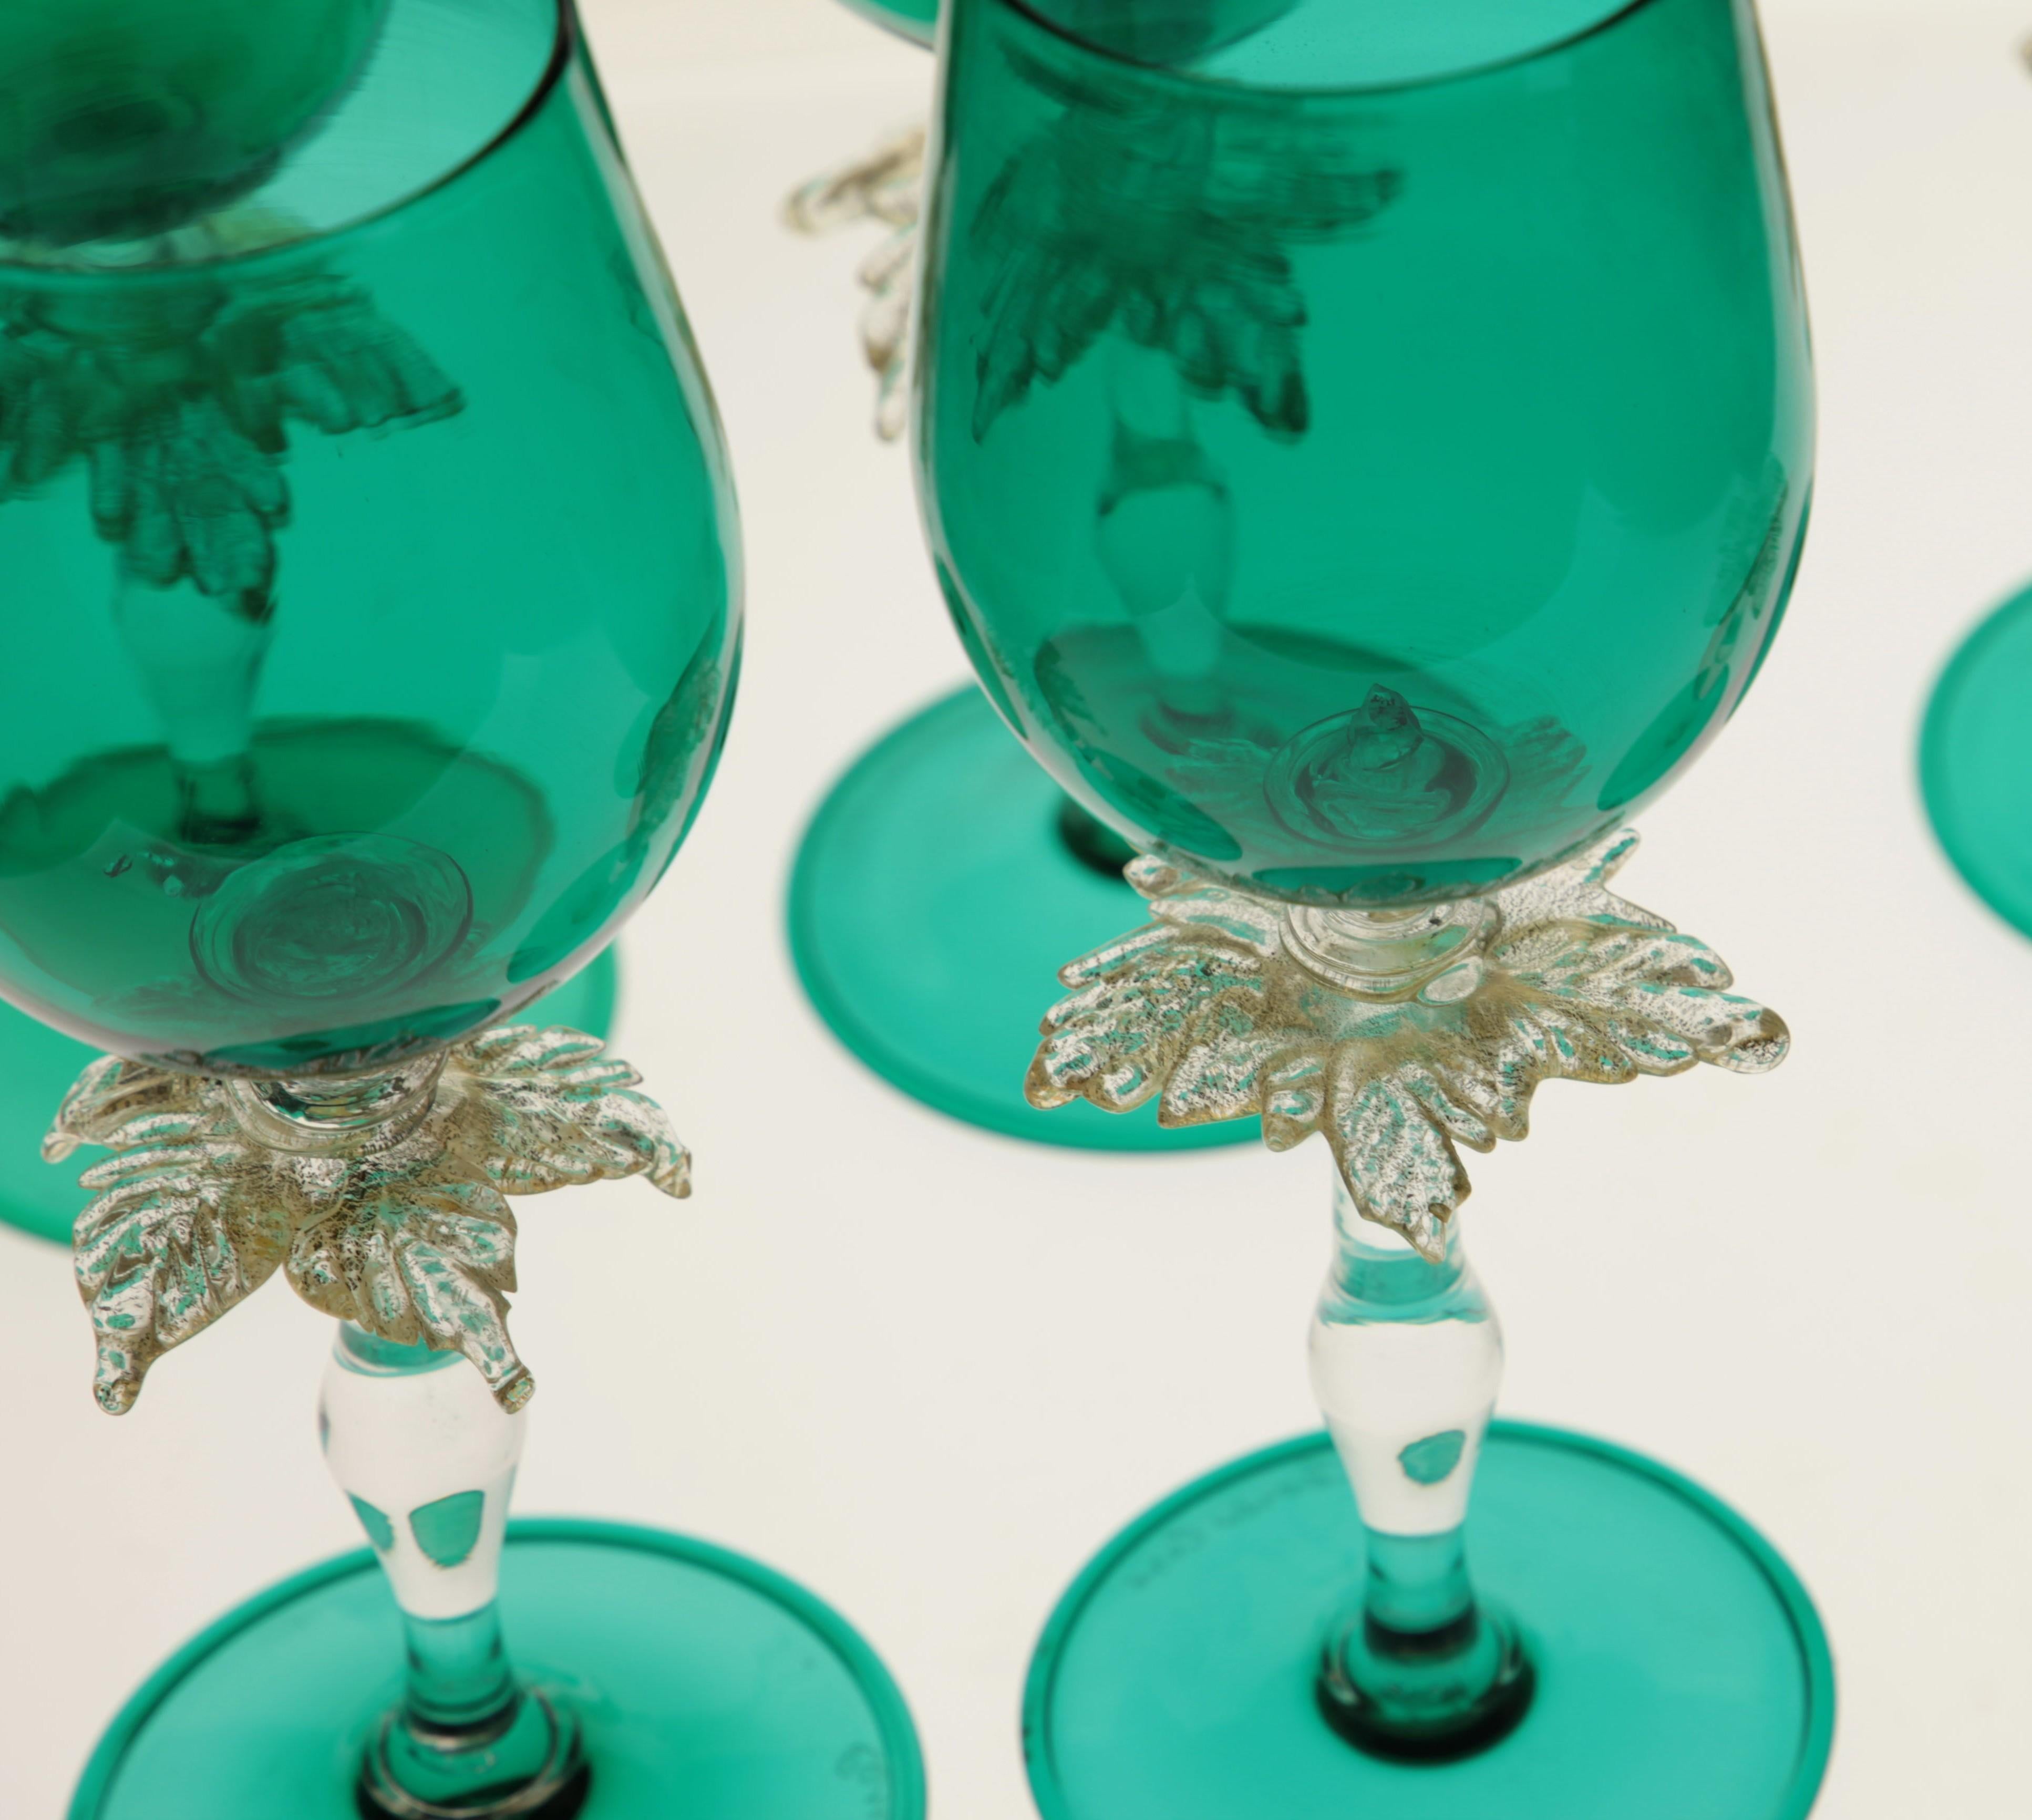 Set of six stemmed glass from Cenedese, made in Murano.
 
The glasses are in green with a palm leaf design in-between the stem and the glass. The leaf contains elements of gold leaf that glimmers when light reflects on it.
 
Celebration present and